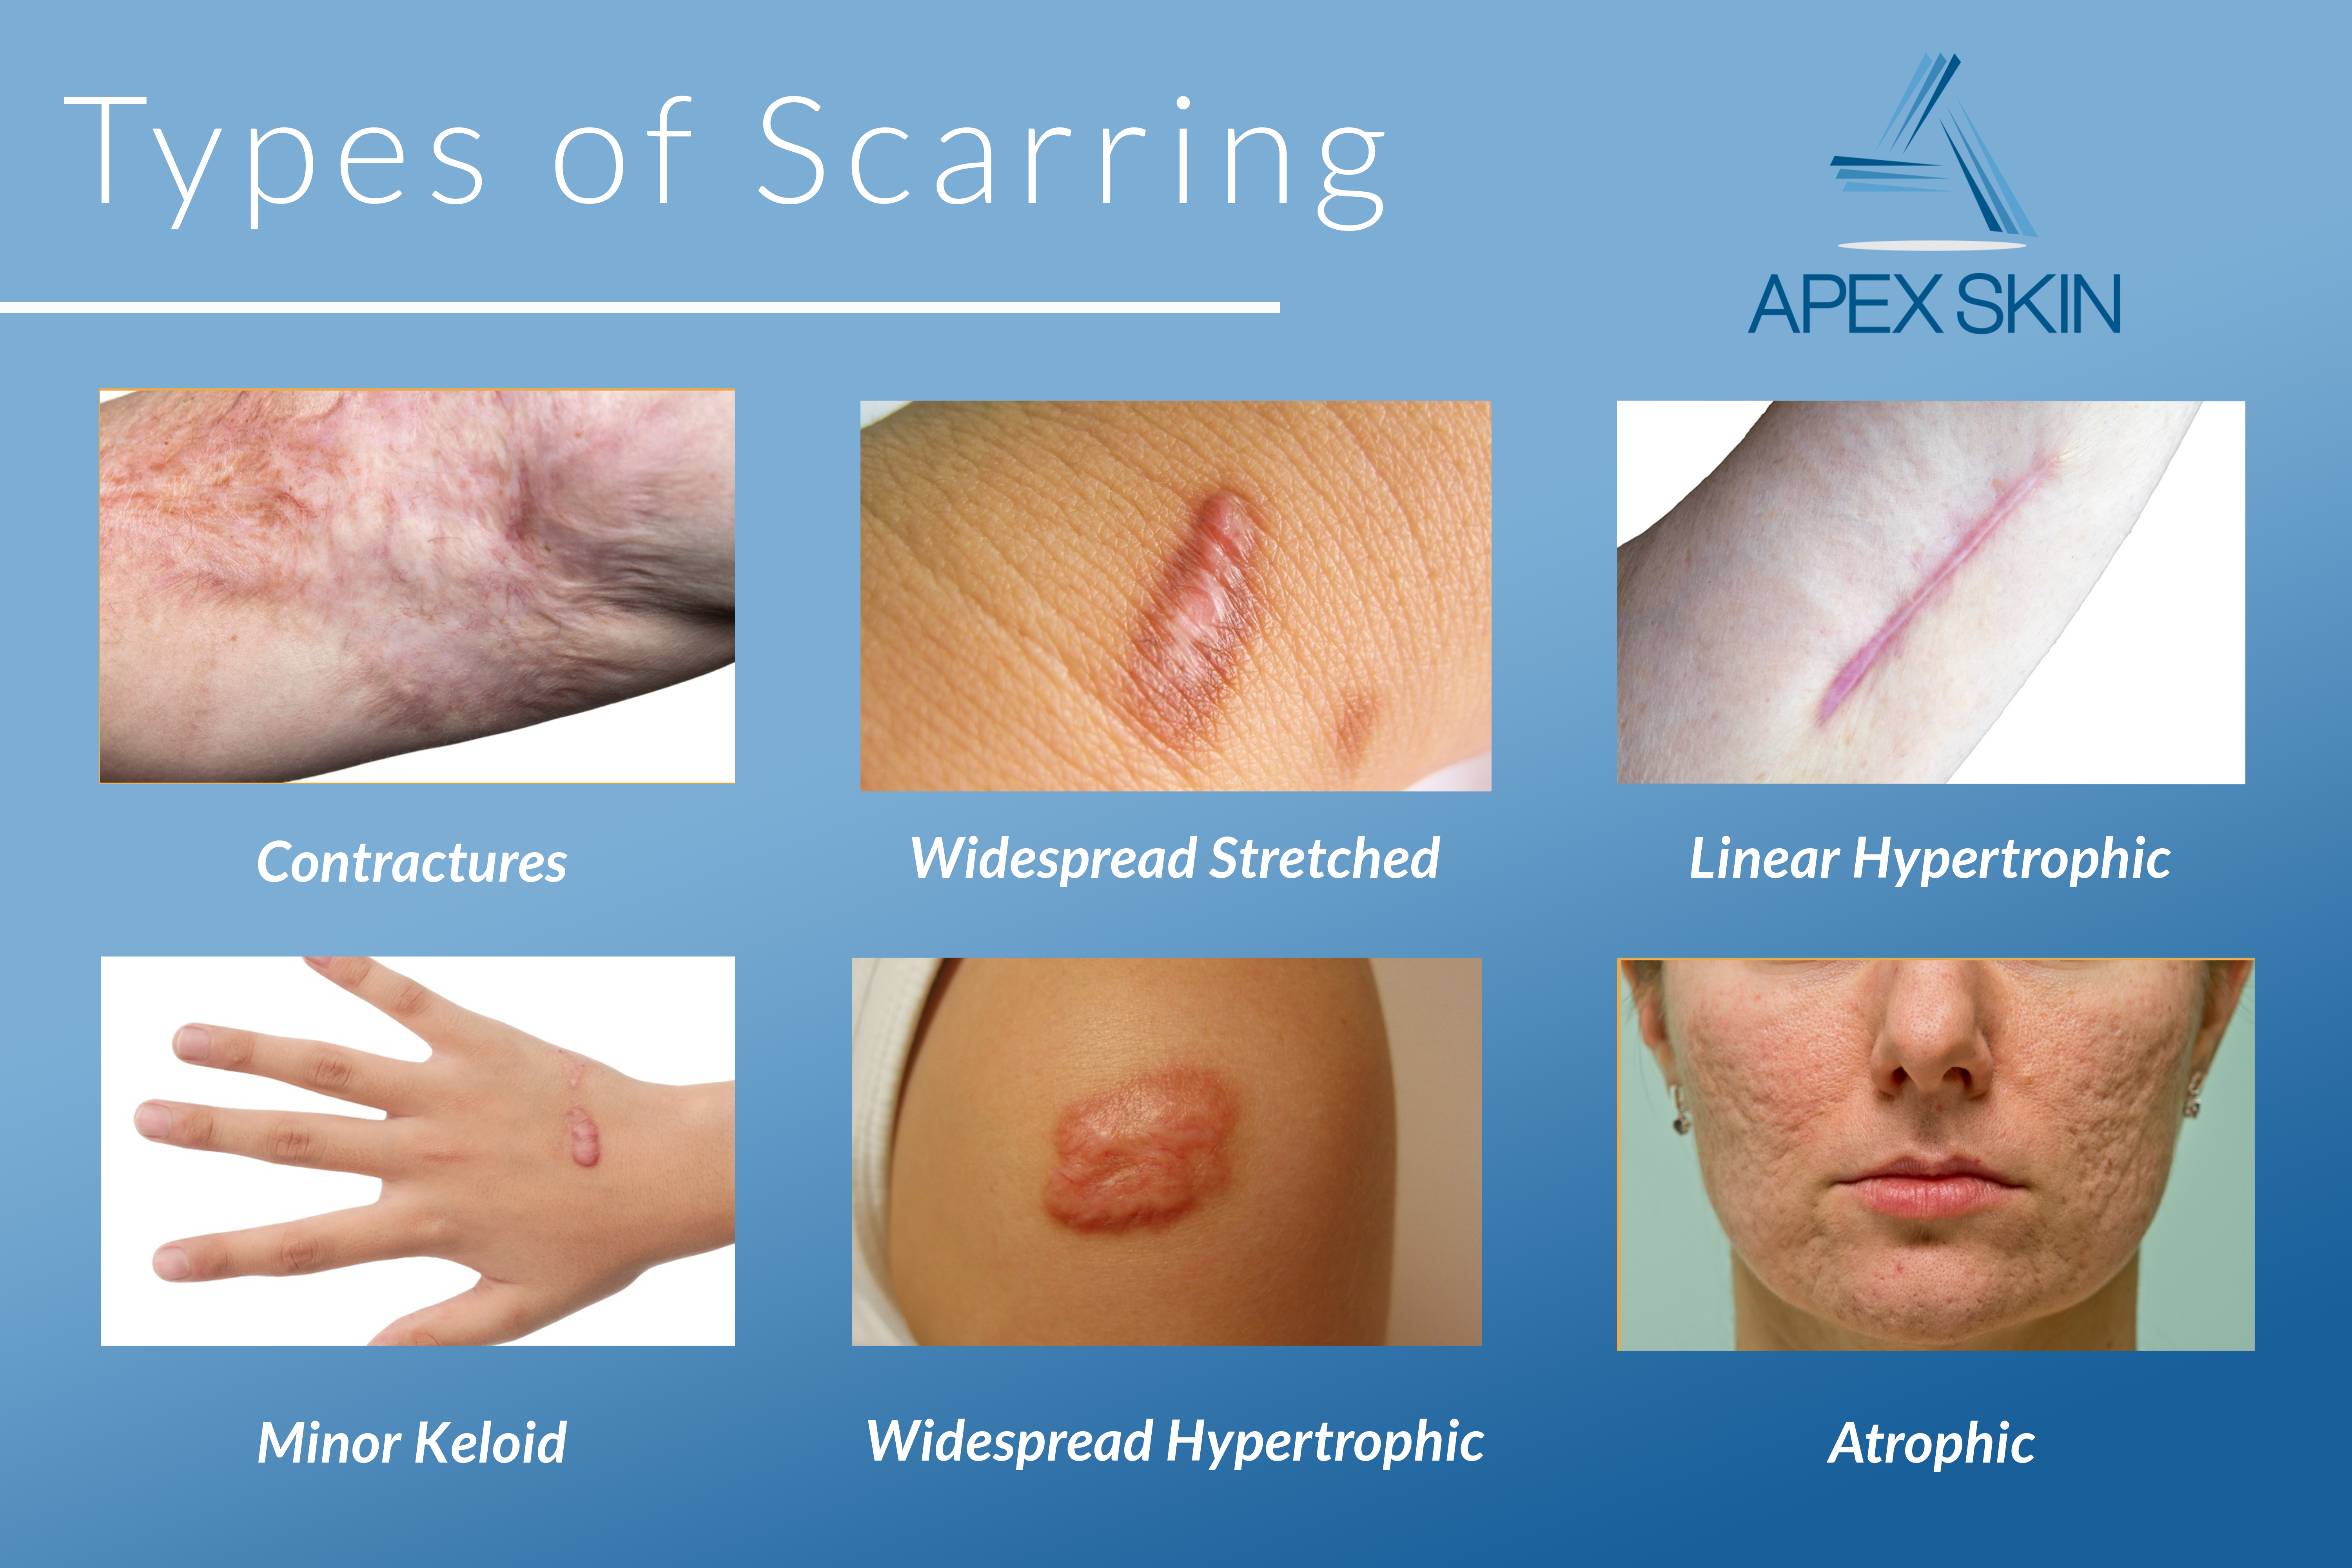 types of scars